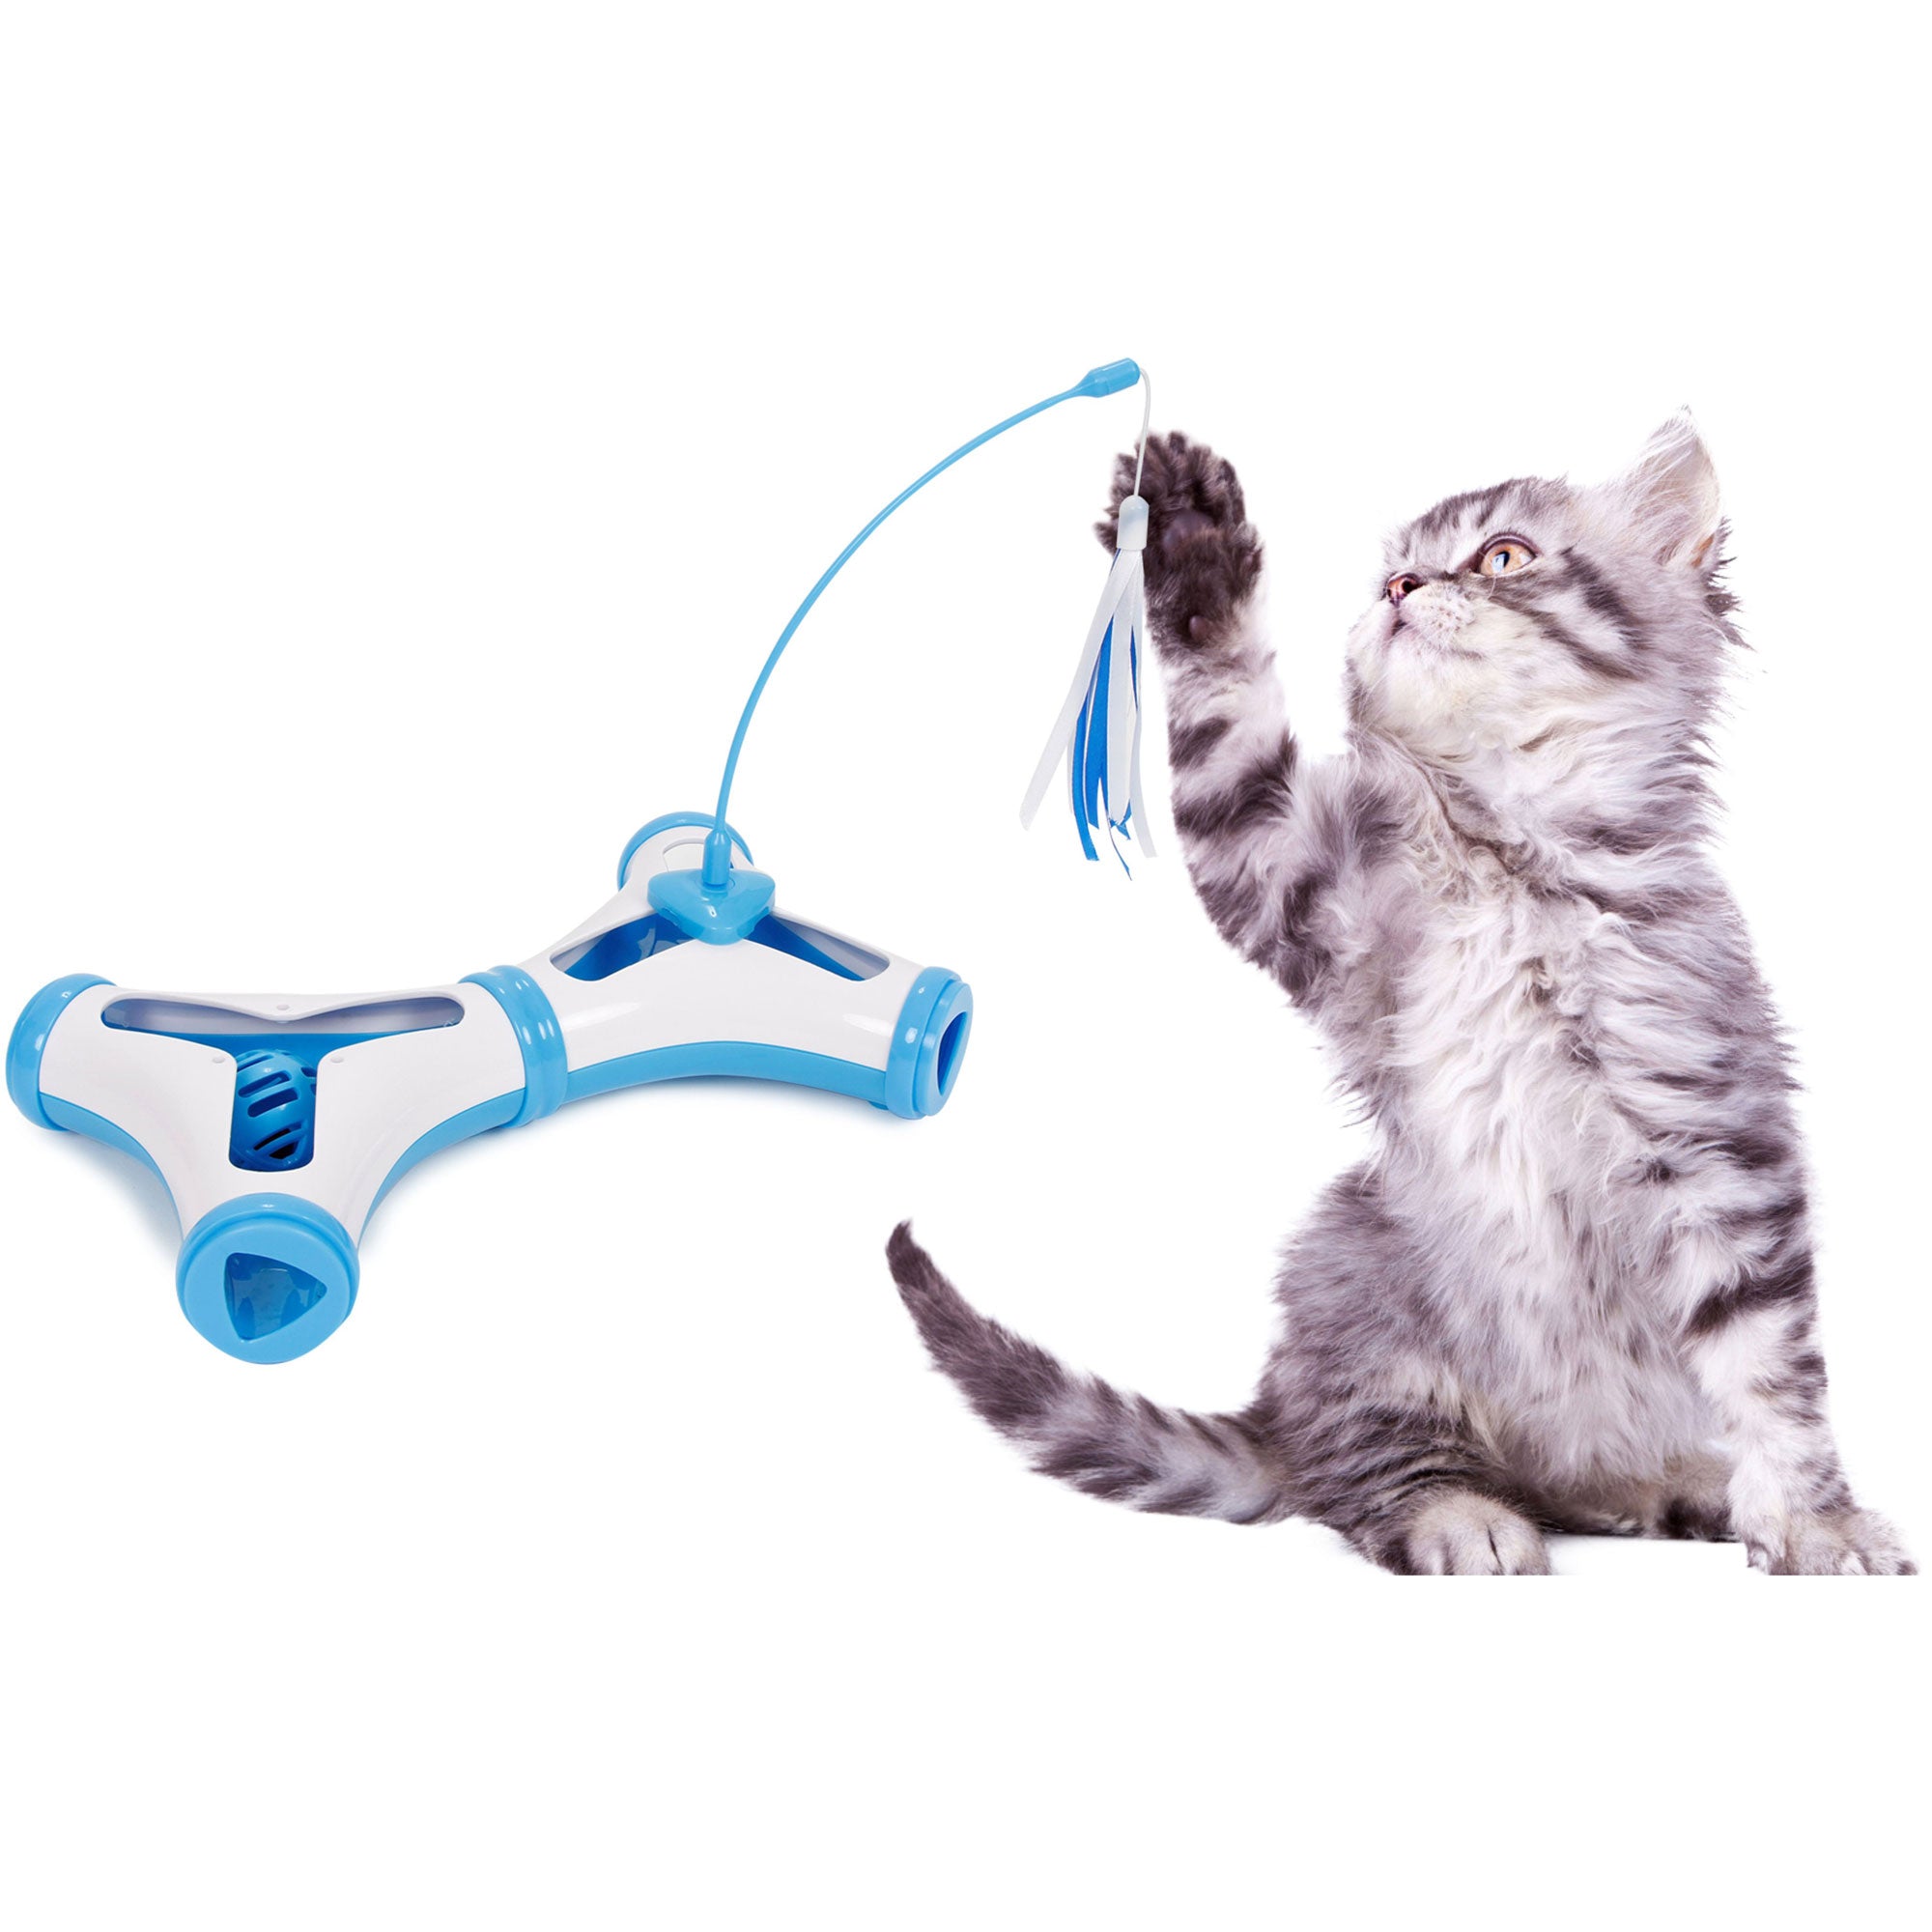 Pet Life Kitty-Tease Training Cat Toy - Green